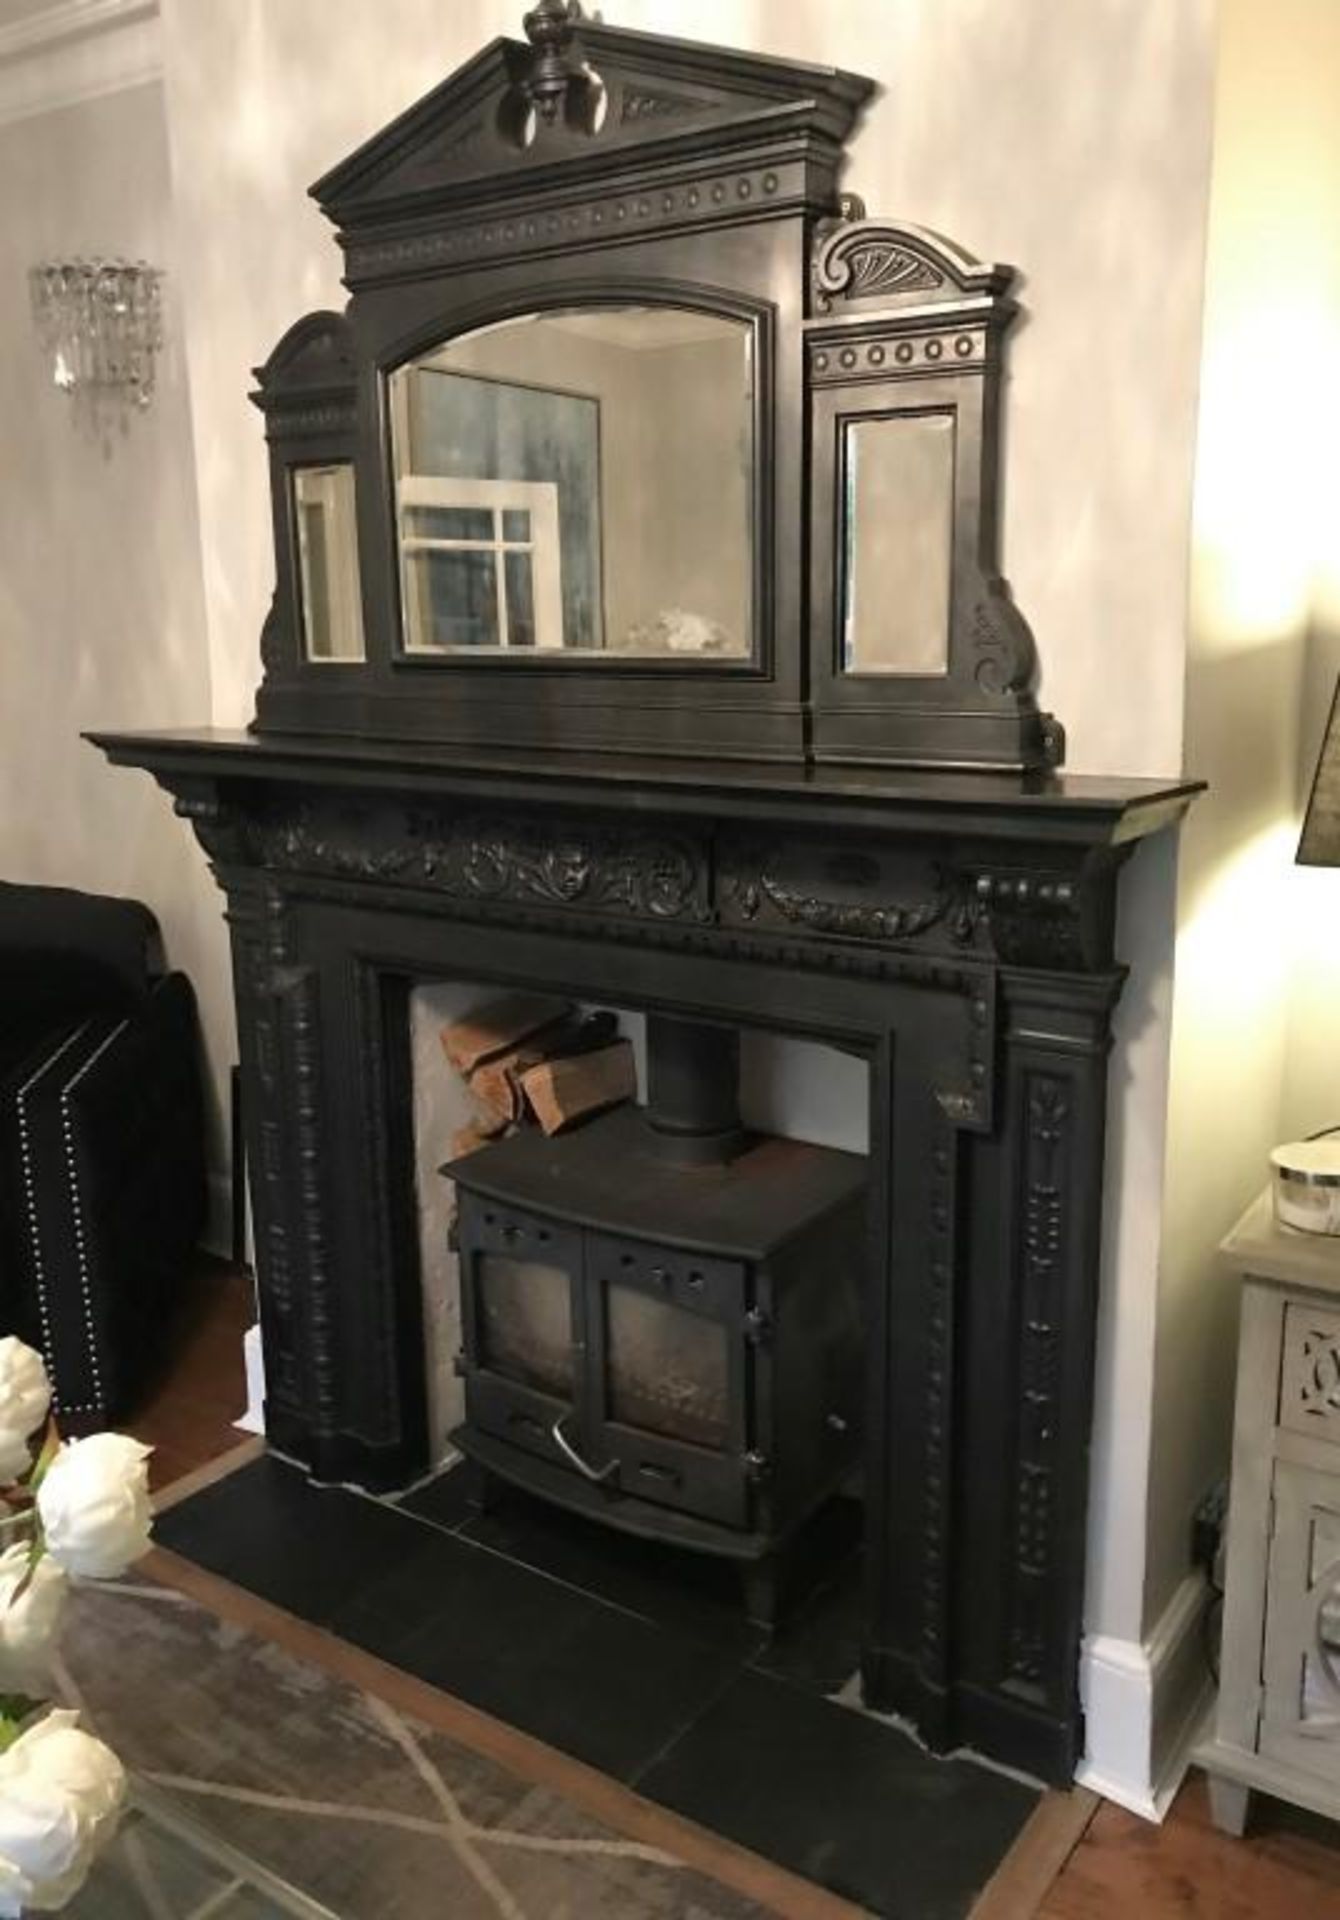 1 x Ultra Rare Stunningly Ornate Antique Victorian Cast Iron Fireplace, With Matching Cast Iron Mirr